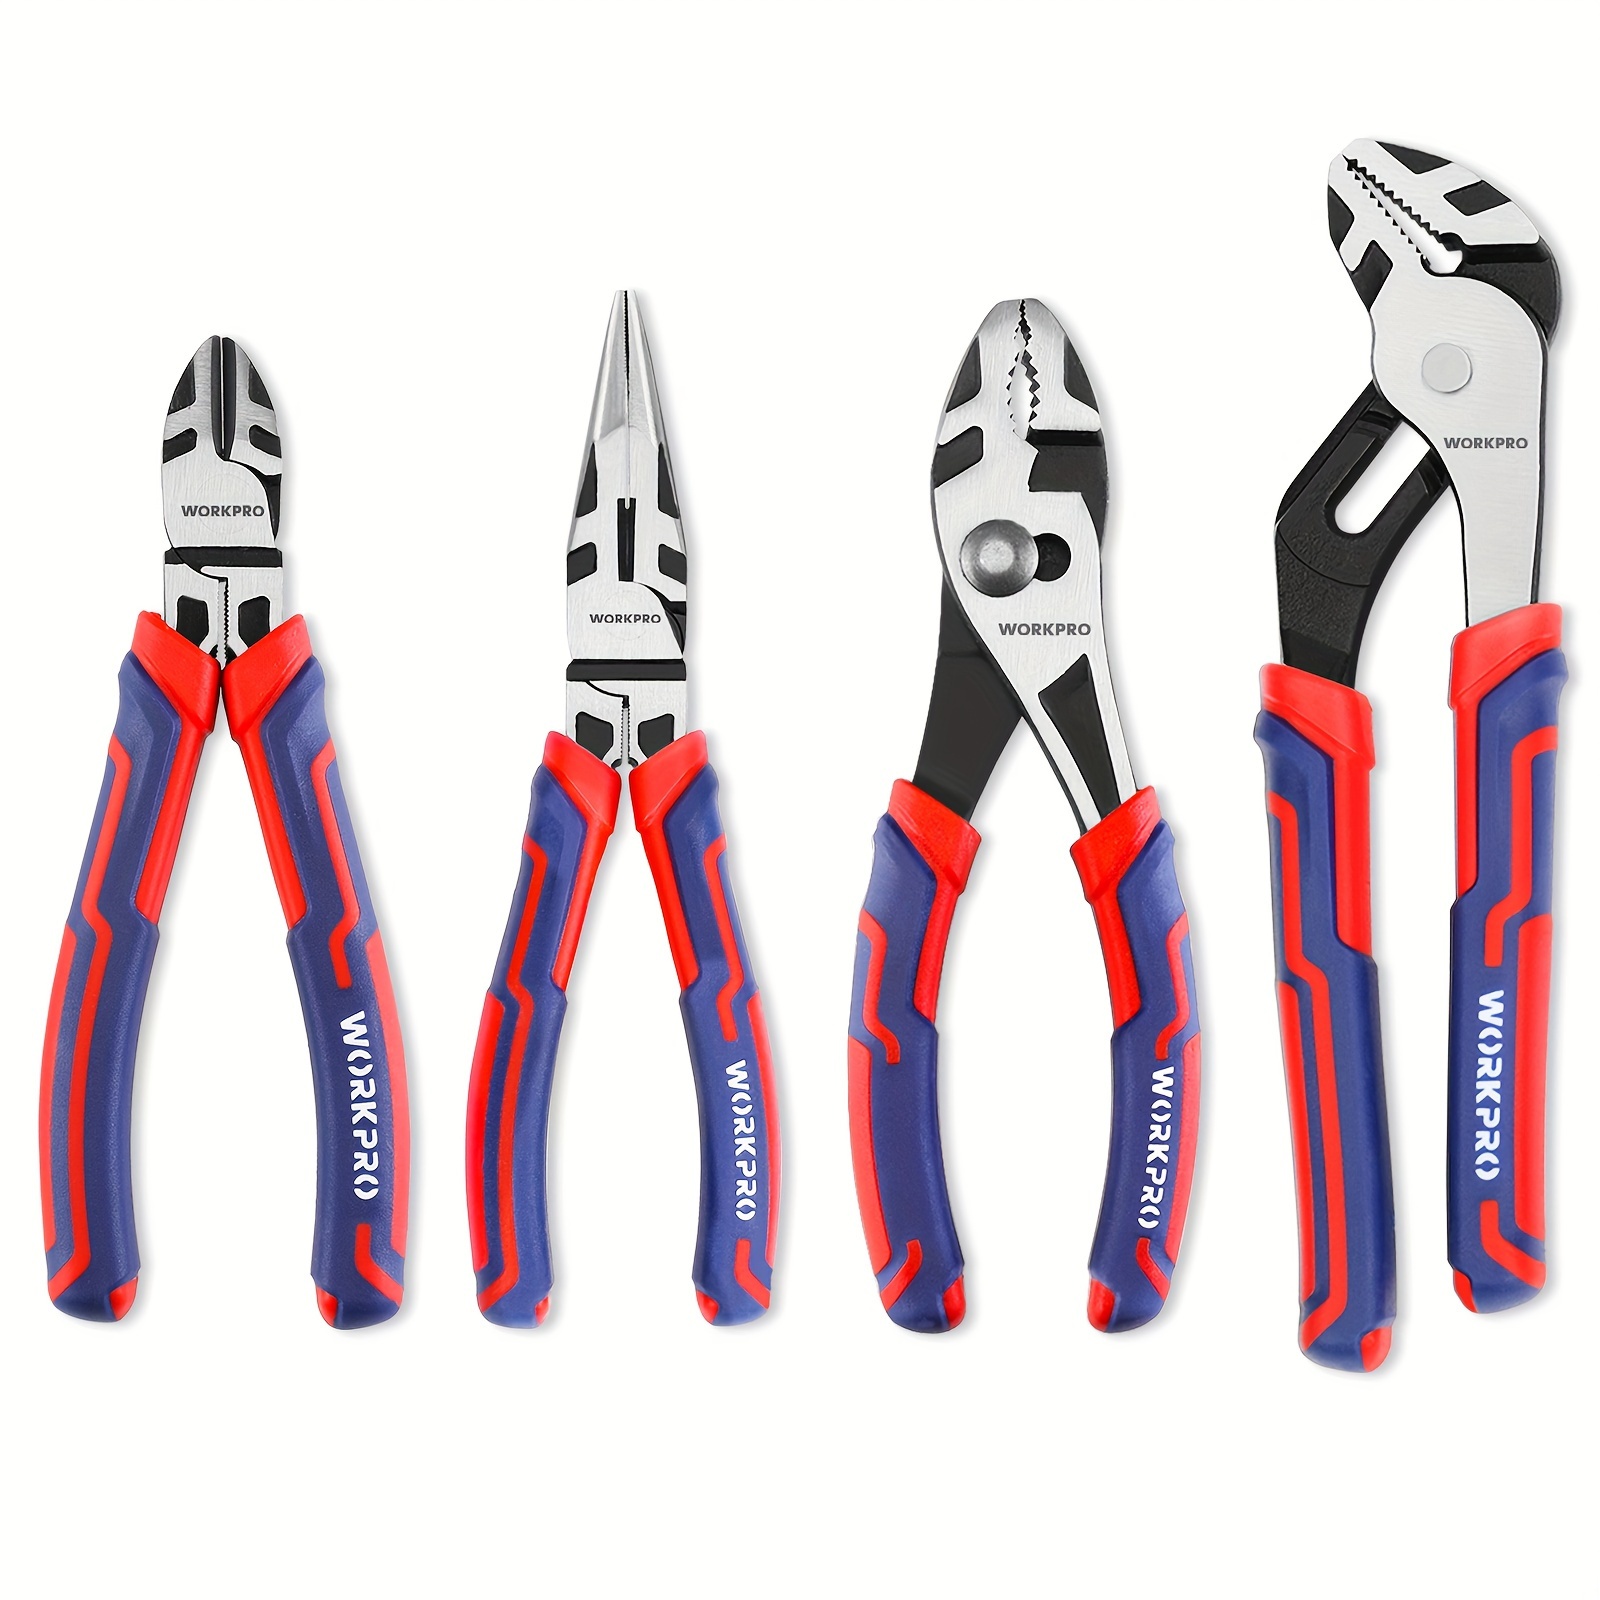 

Workpro 4-piece Pliers Set, Premium Cr-v Construction Pliers Tool Sets Including Long Nose, Diagonal Cutting, Groove Joint And Slip Joint Pliersred